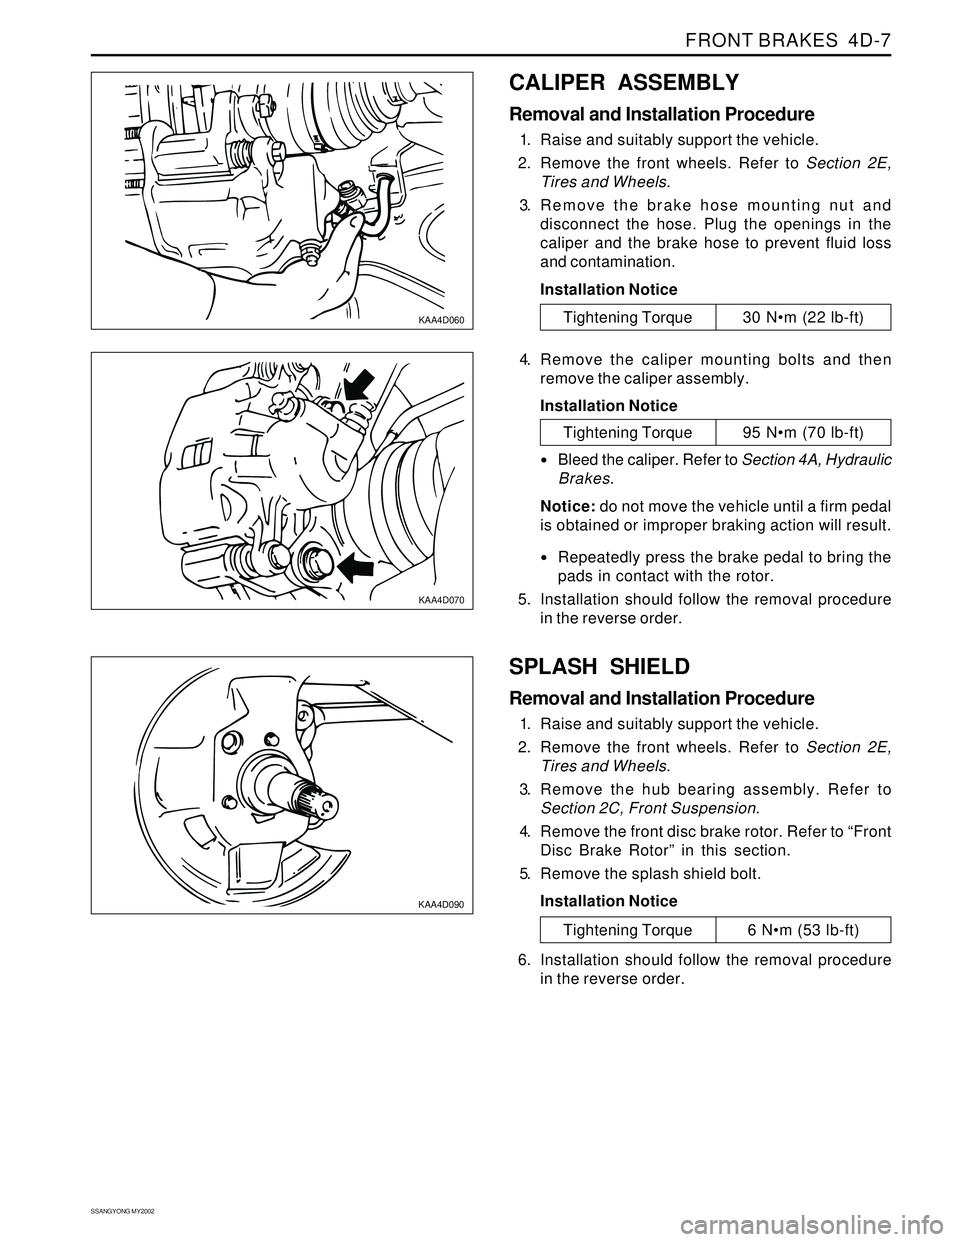 SSANGYONG KORANDO 1997  Service Repair Manual FRONT BRAKES  4D-7
SSANGYONG MY2002
KAA4D060
KAA4D070
CALIPER ASSEMBLY
Removal and Installation Procedure
1. Raise and suitably support the vehicle.
2. Remove the front wheels. Refer to Section 2E,
Ti